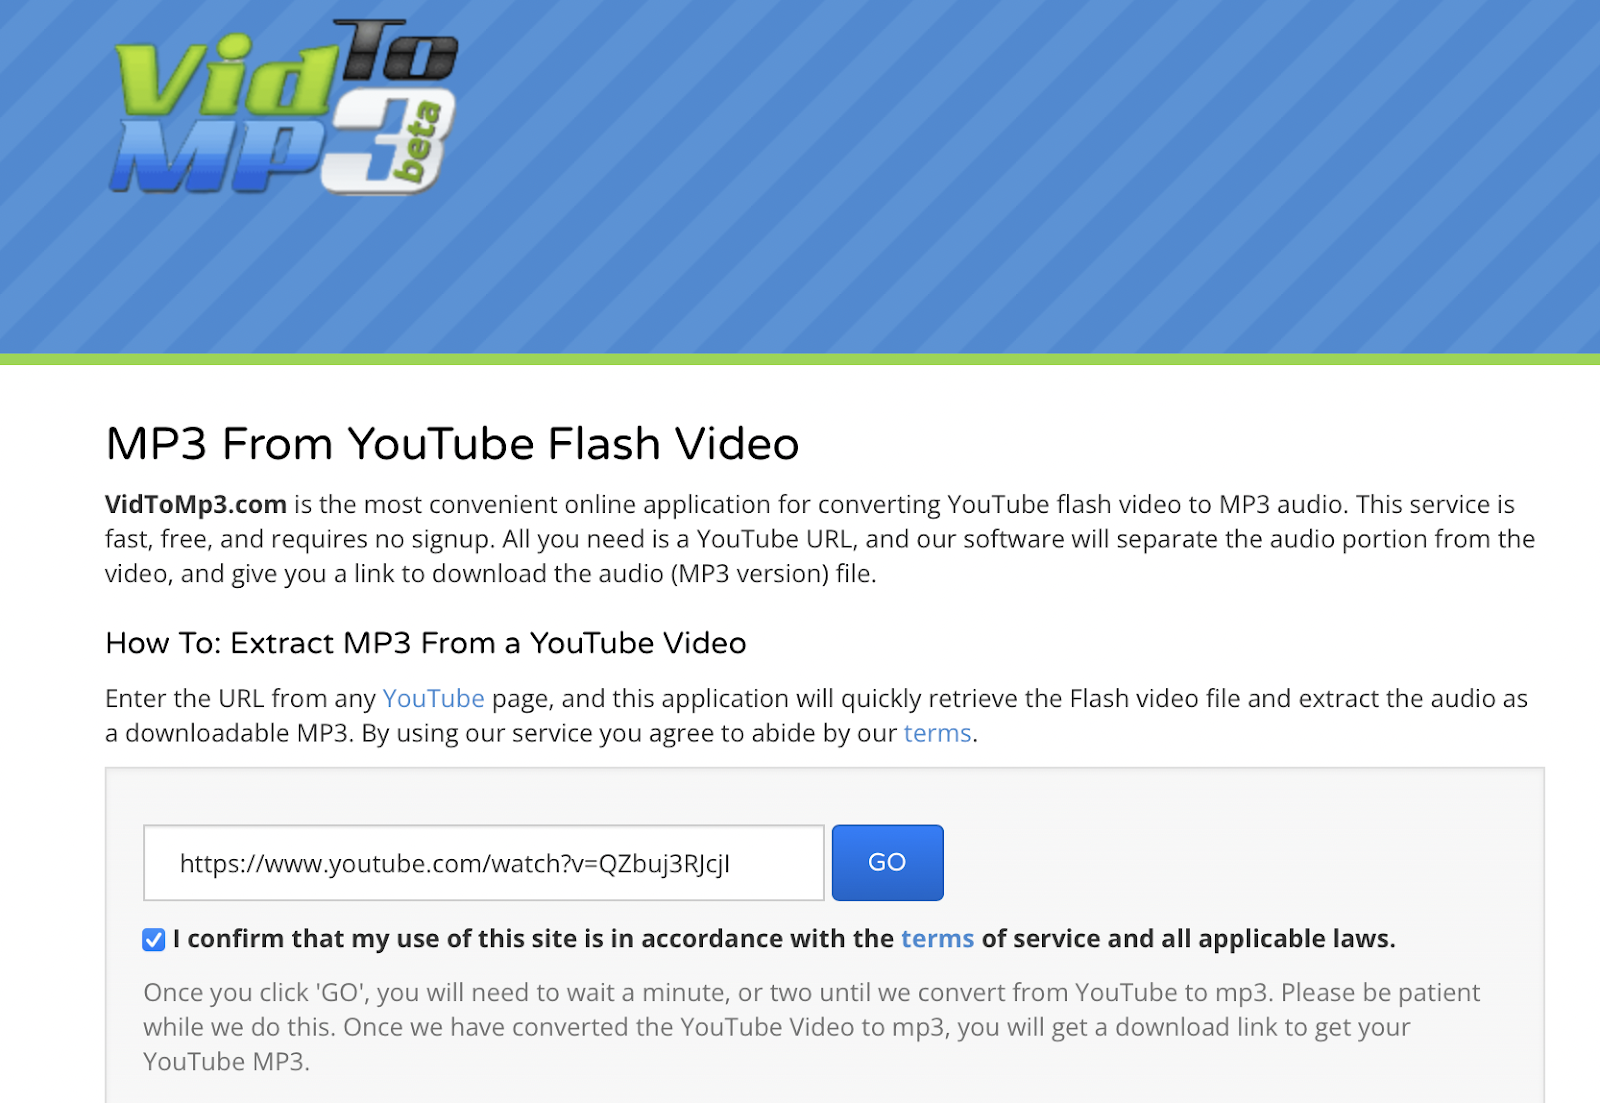 MP3 from YouTube using VidToMp3.com